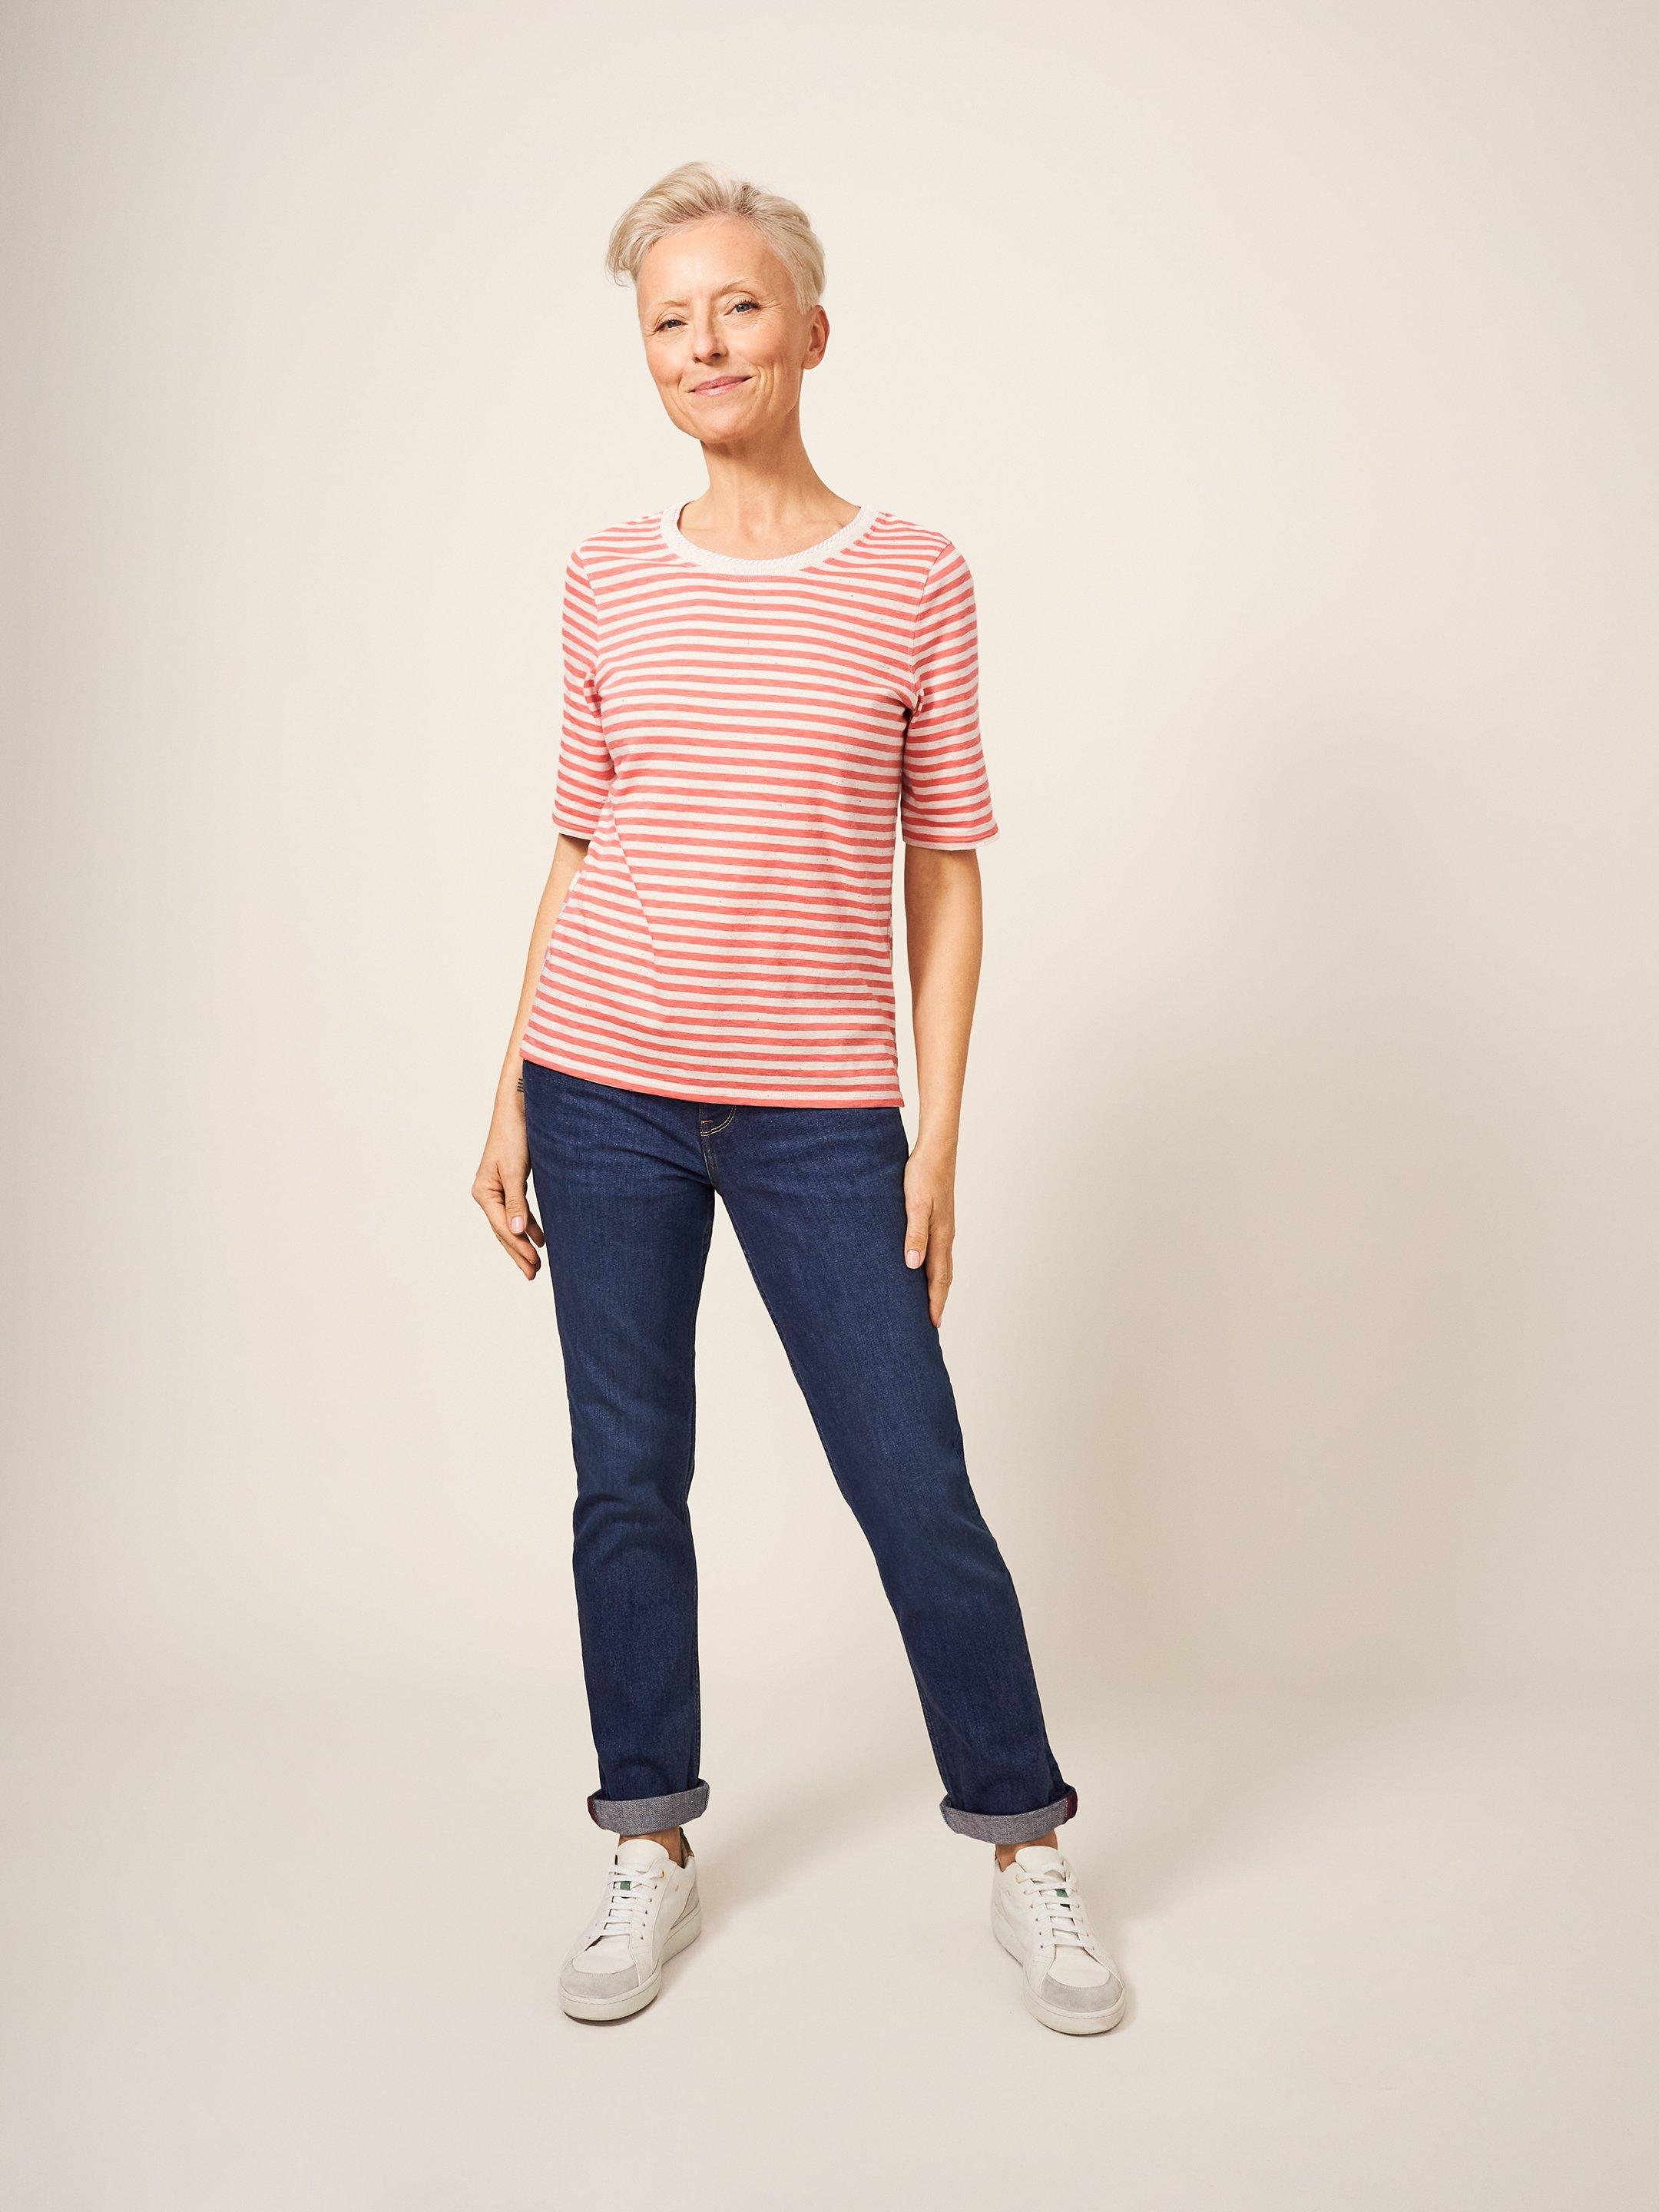 ANNABEL TEE in PINK MLT - MODEL FRONT